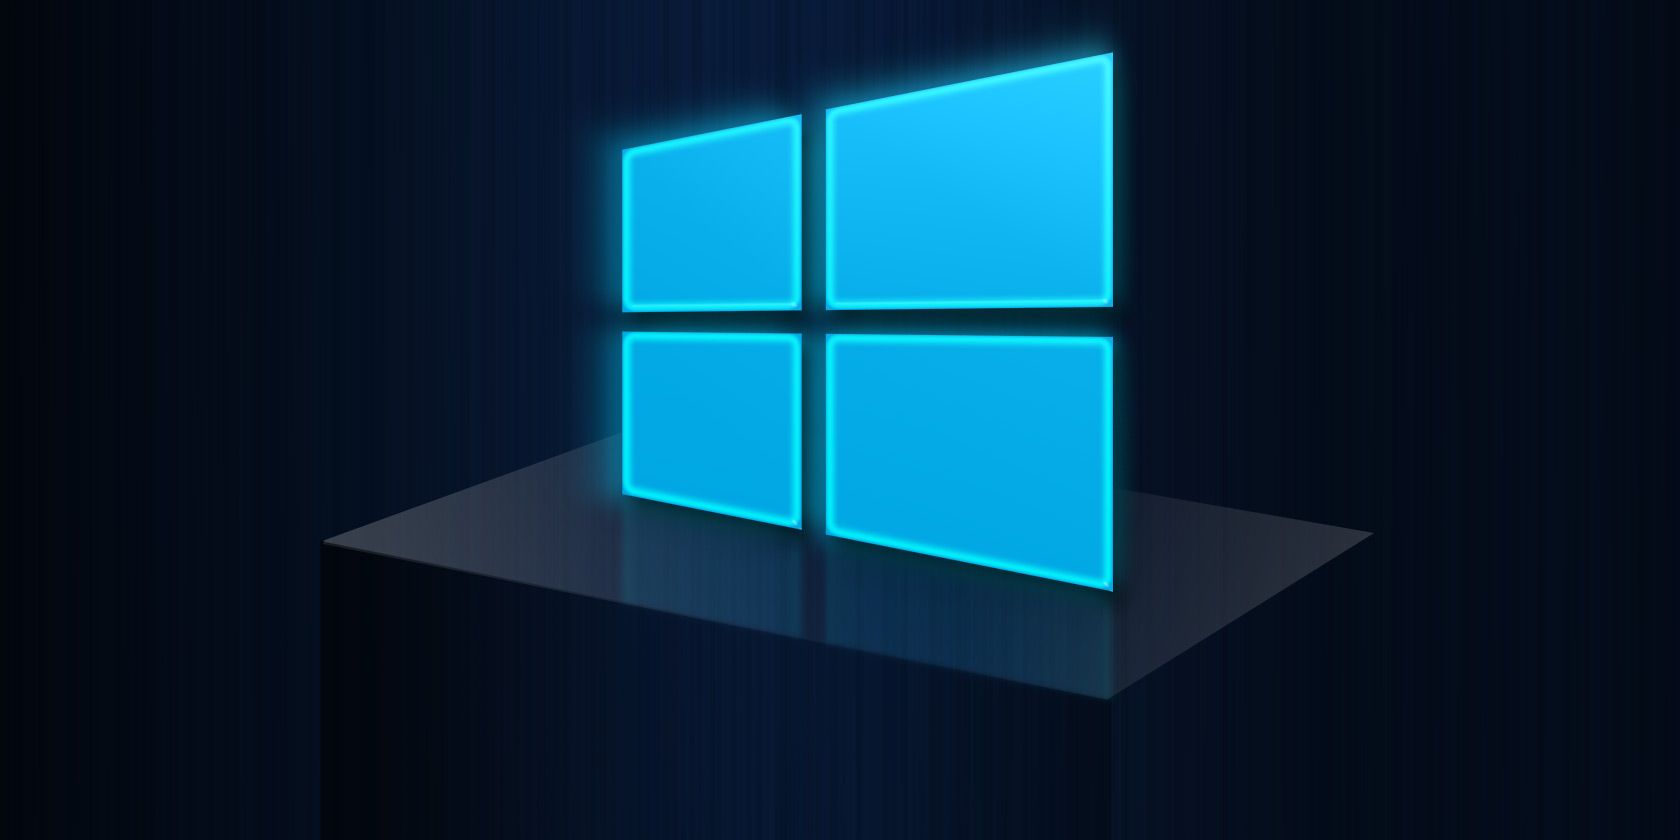 Windows 8 Is The Most Secure Version Yet: Here’s Why